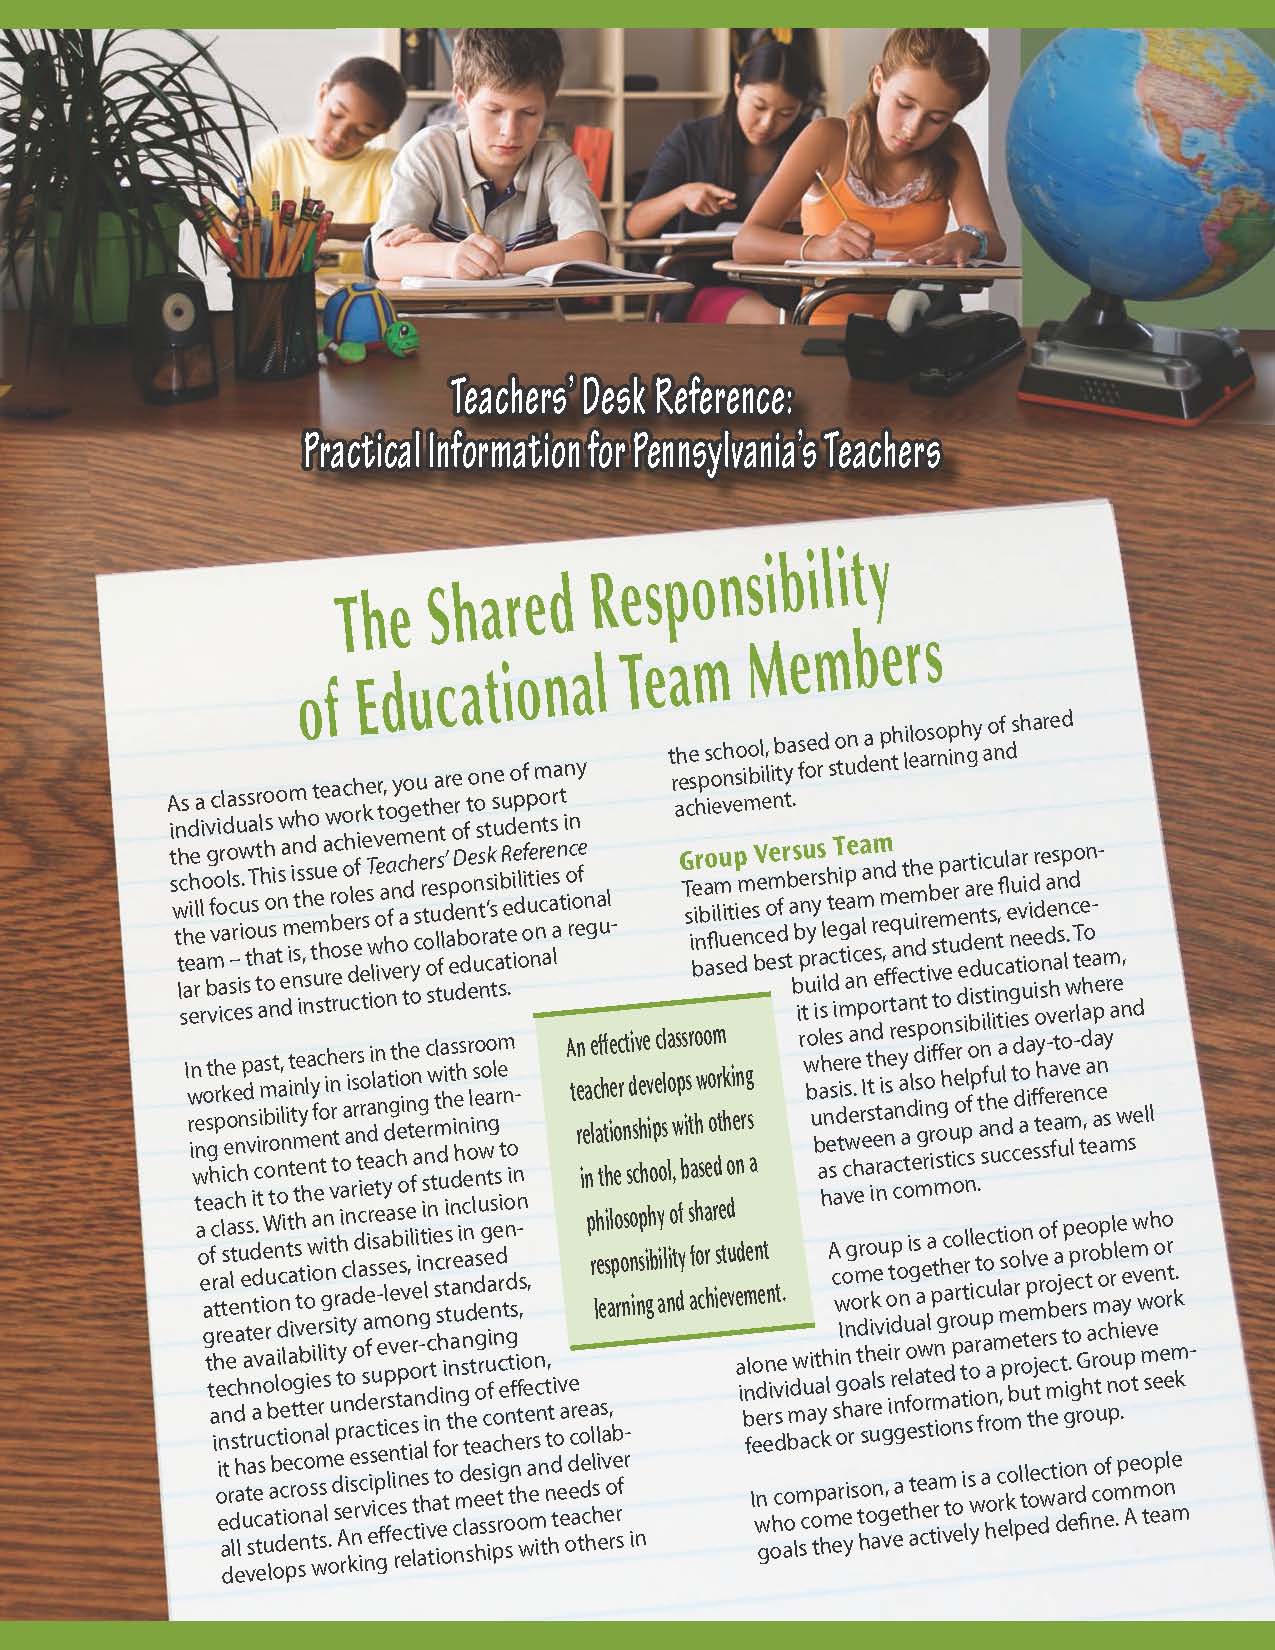 Teachers' Desk Reference: The Shared Responsibility of Educational Team Members